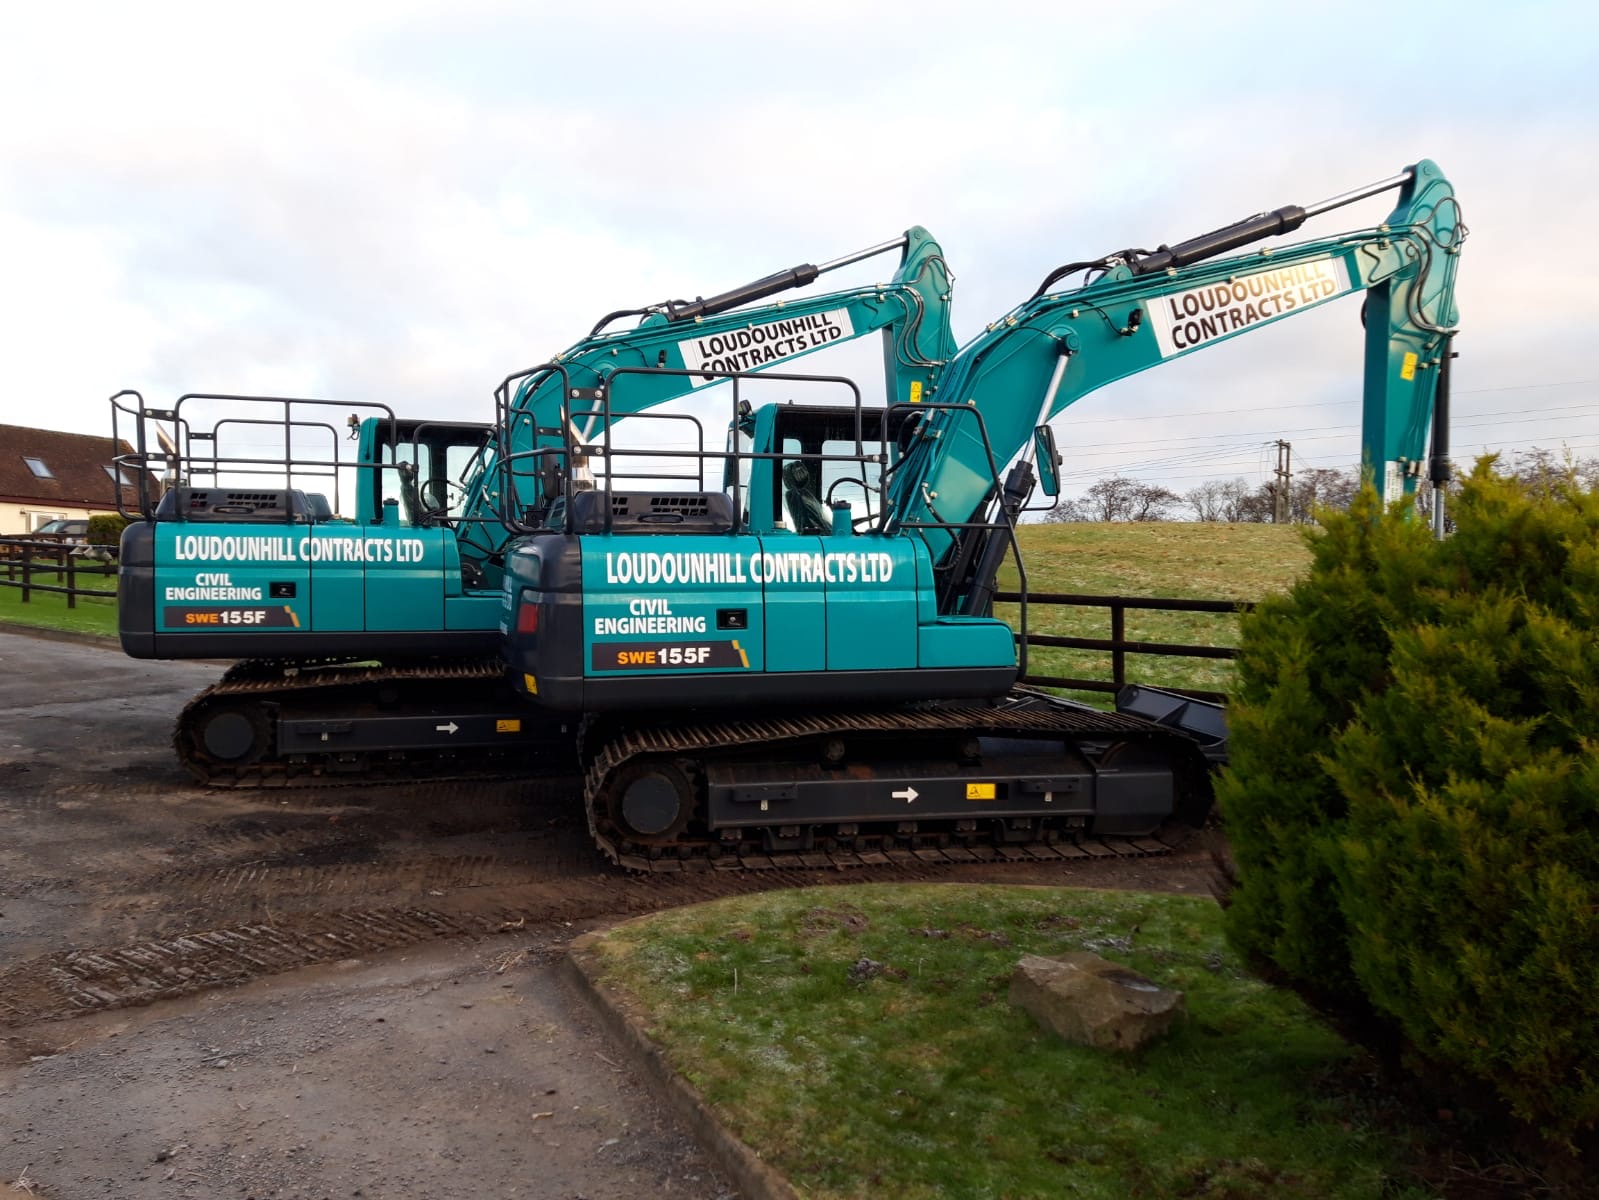 Sunward machines join plant fleet at Loudounhill Contracts